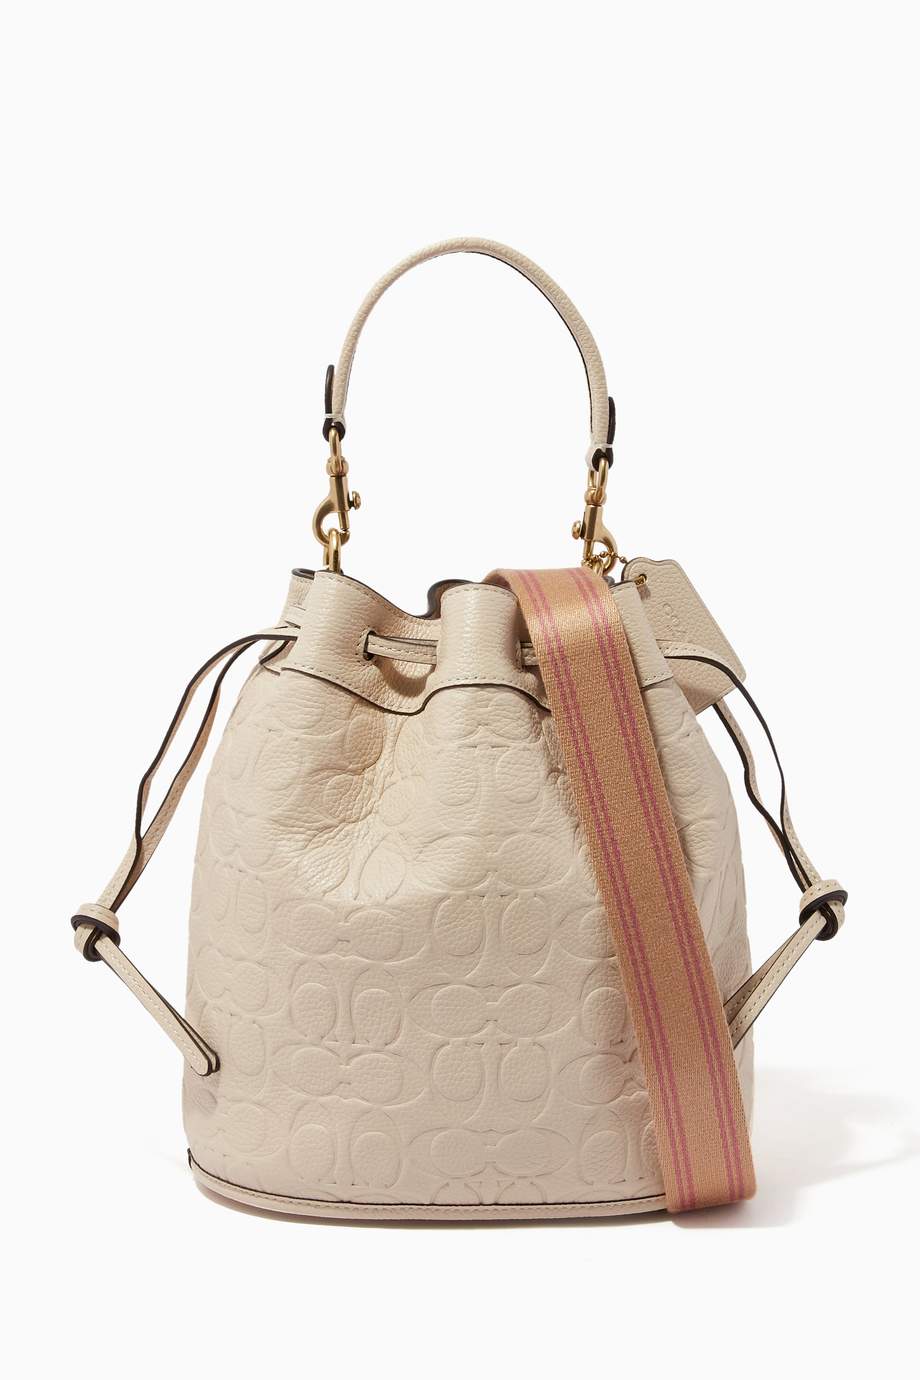 Shop Coach Neutral Field Bucket Bag in Signature Embossed Leather for Women | Ounass UAE